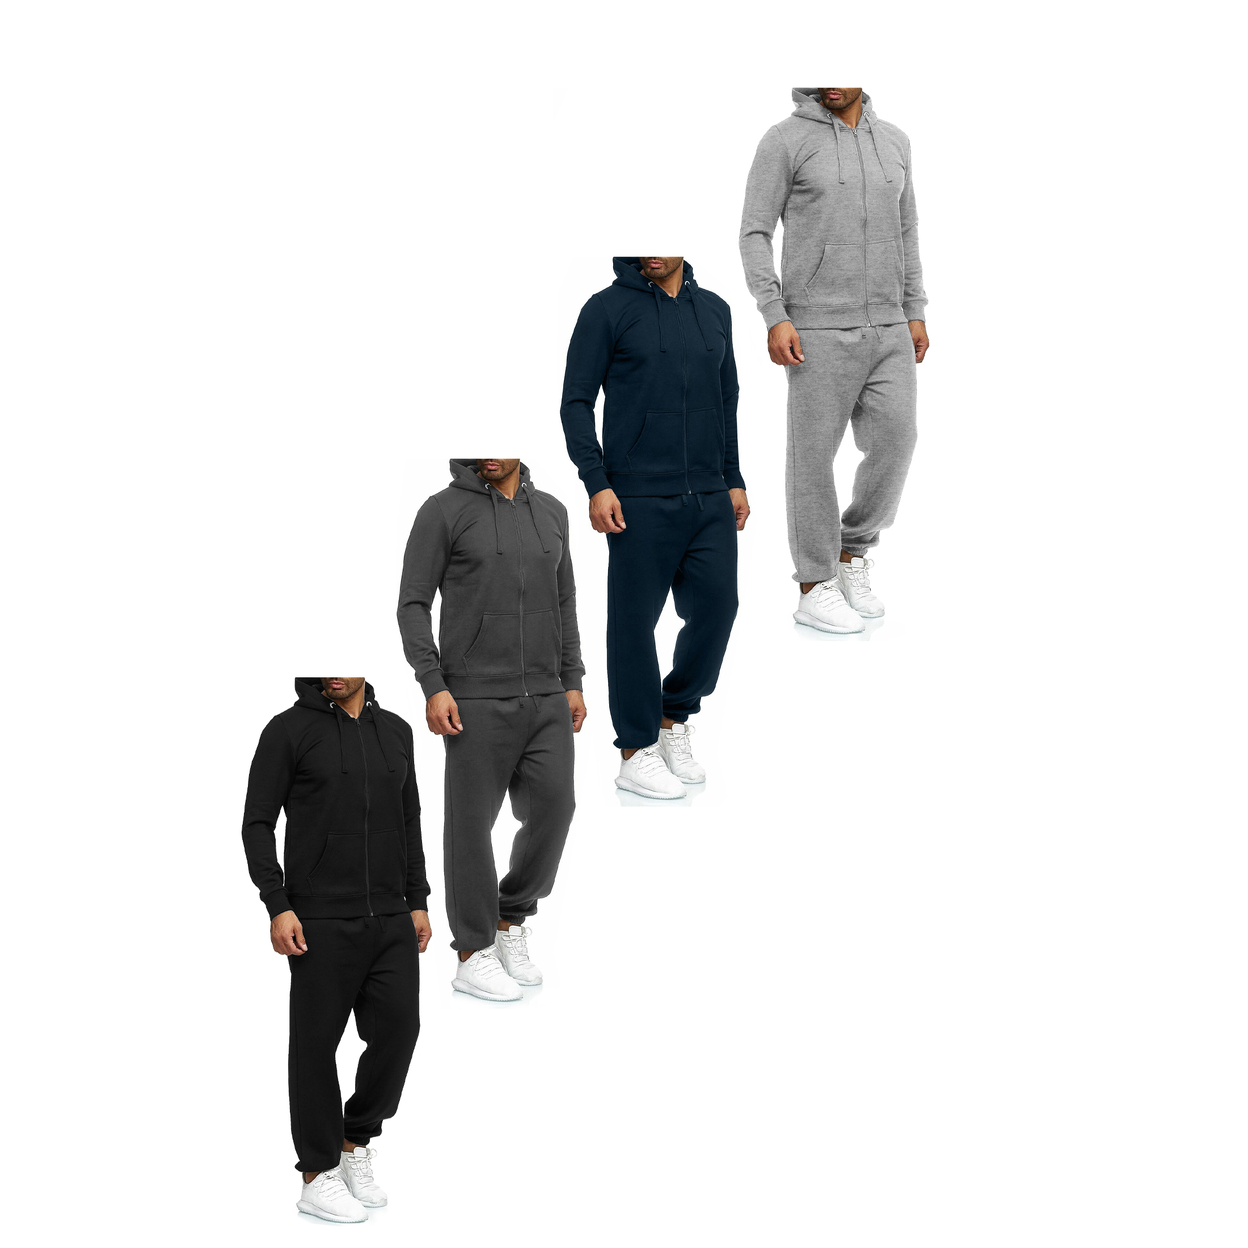 2-Pack: Men's Casual Big & Tall Athletic Active Winter Warm Fleece Lined Full Zip Tracksuit Jogger Set - Black, Small